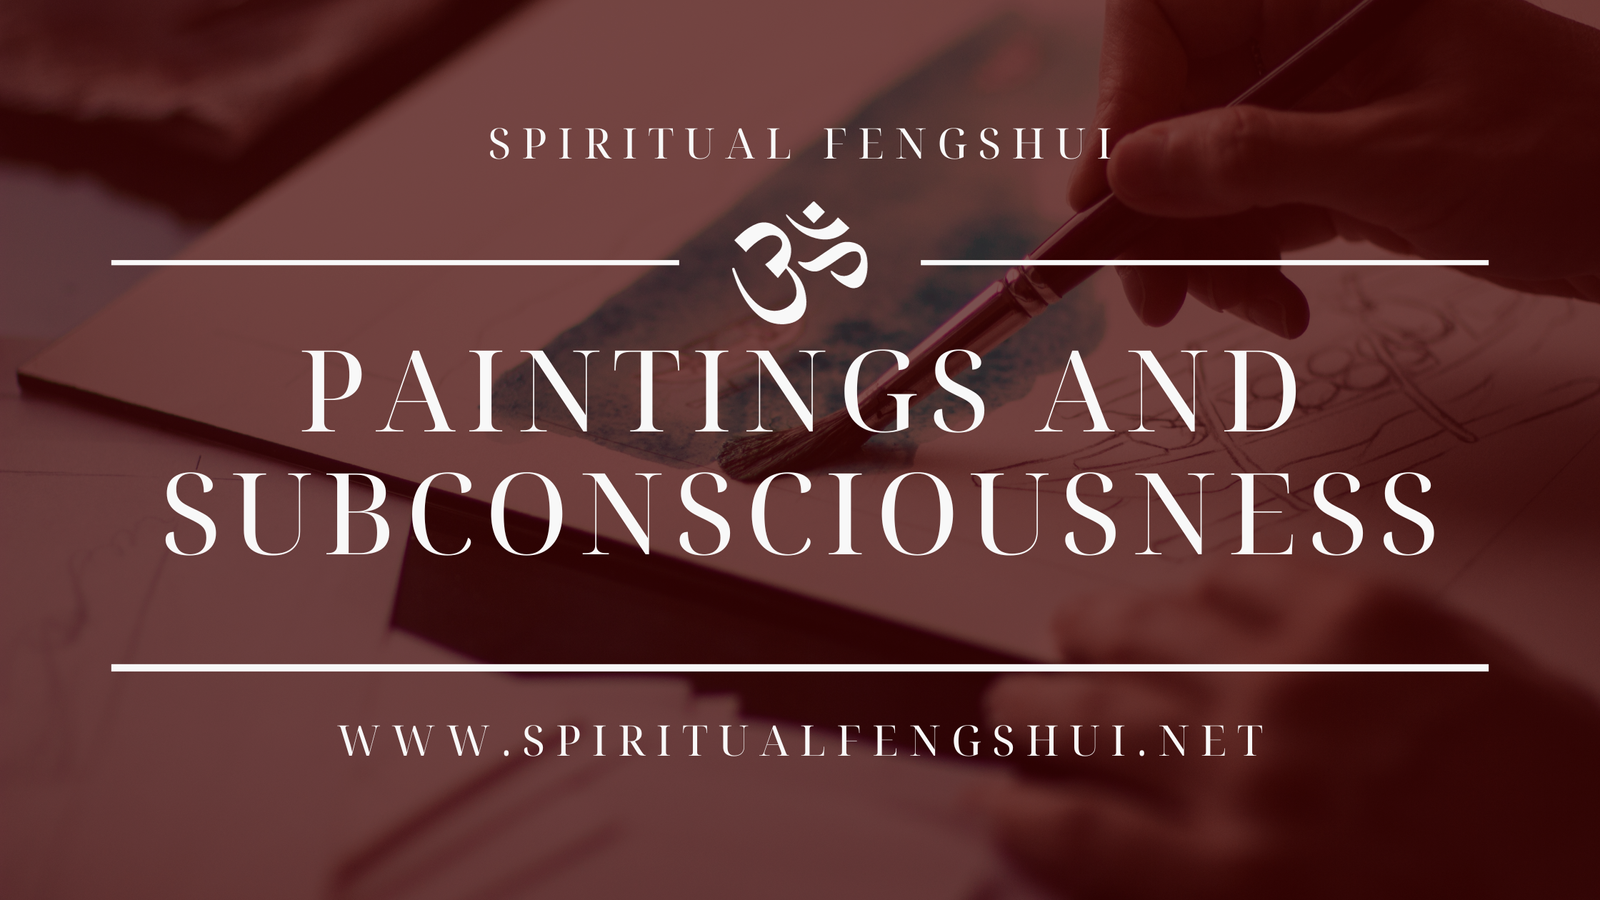 Paintings and Subconsciousness